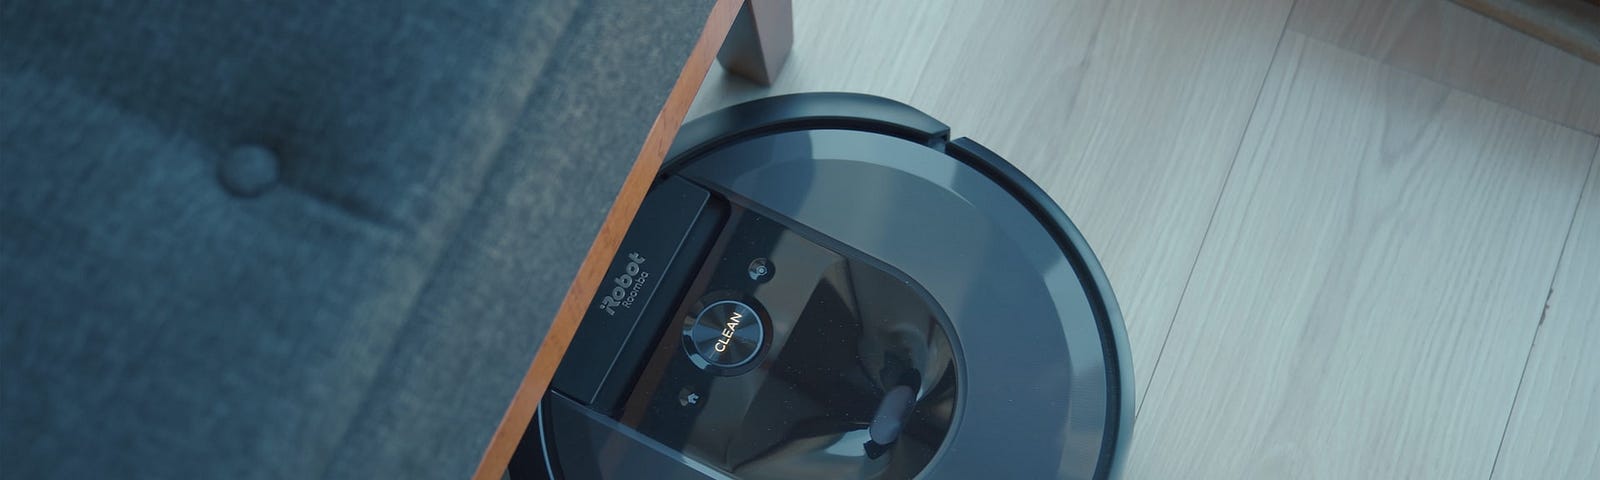 IMAGE: A Roomba robot vacuuming under a piece of furniture